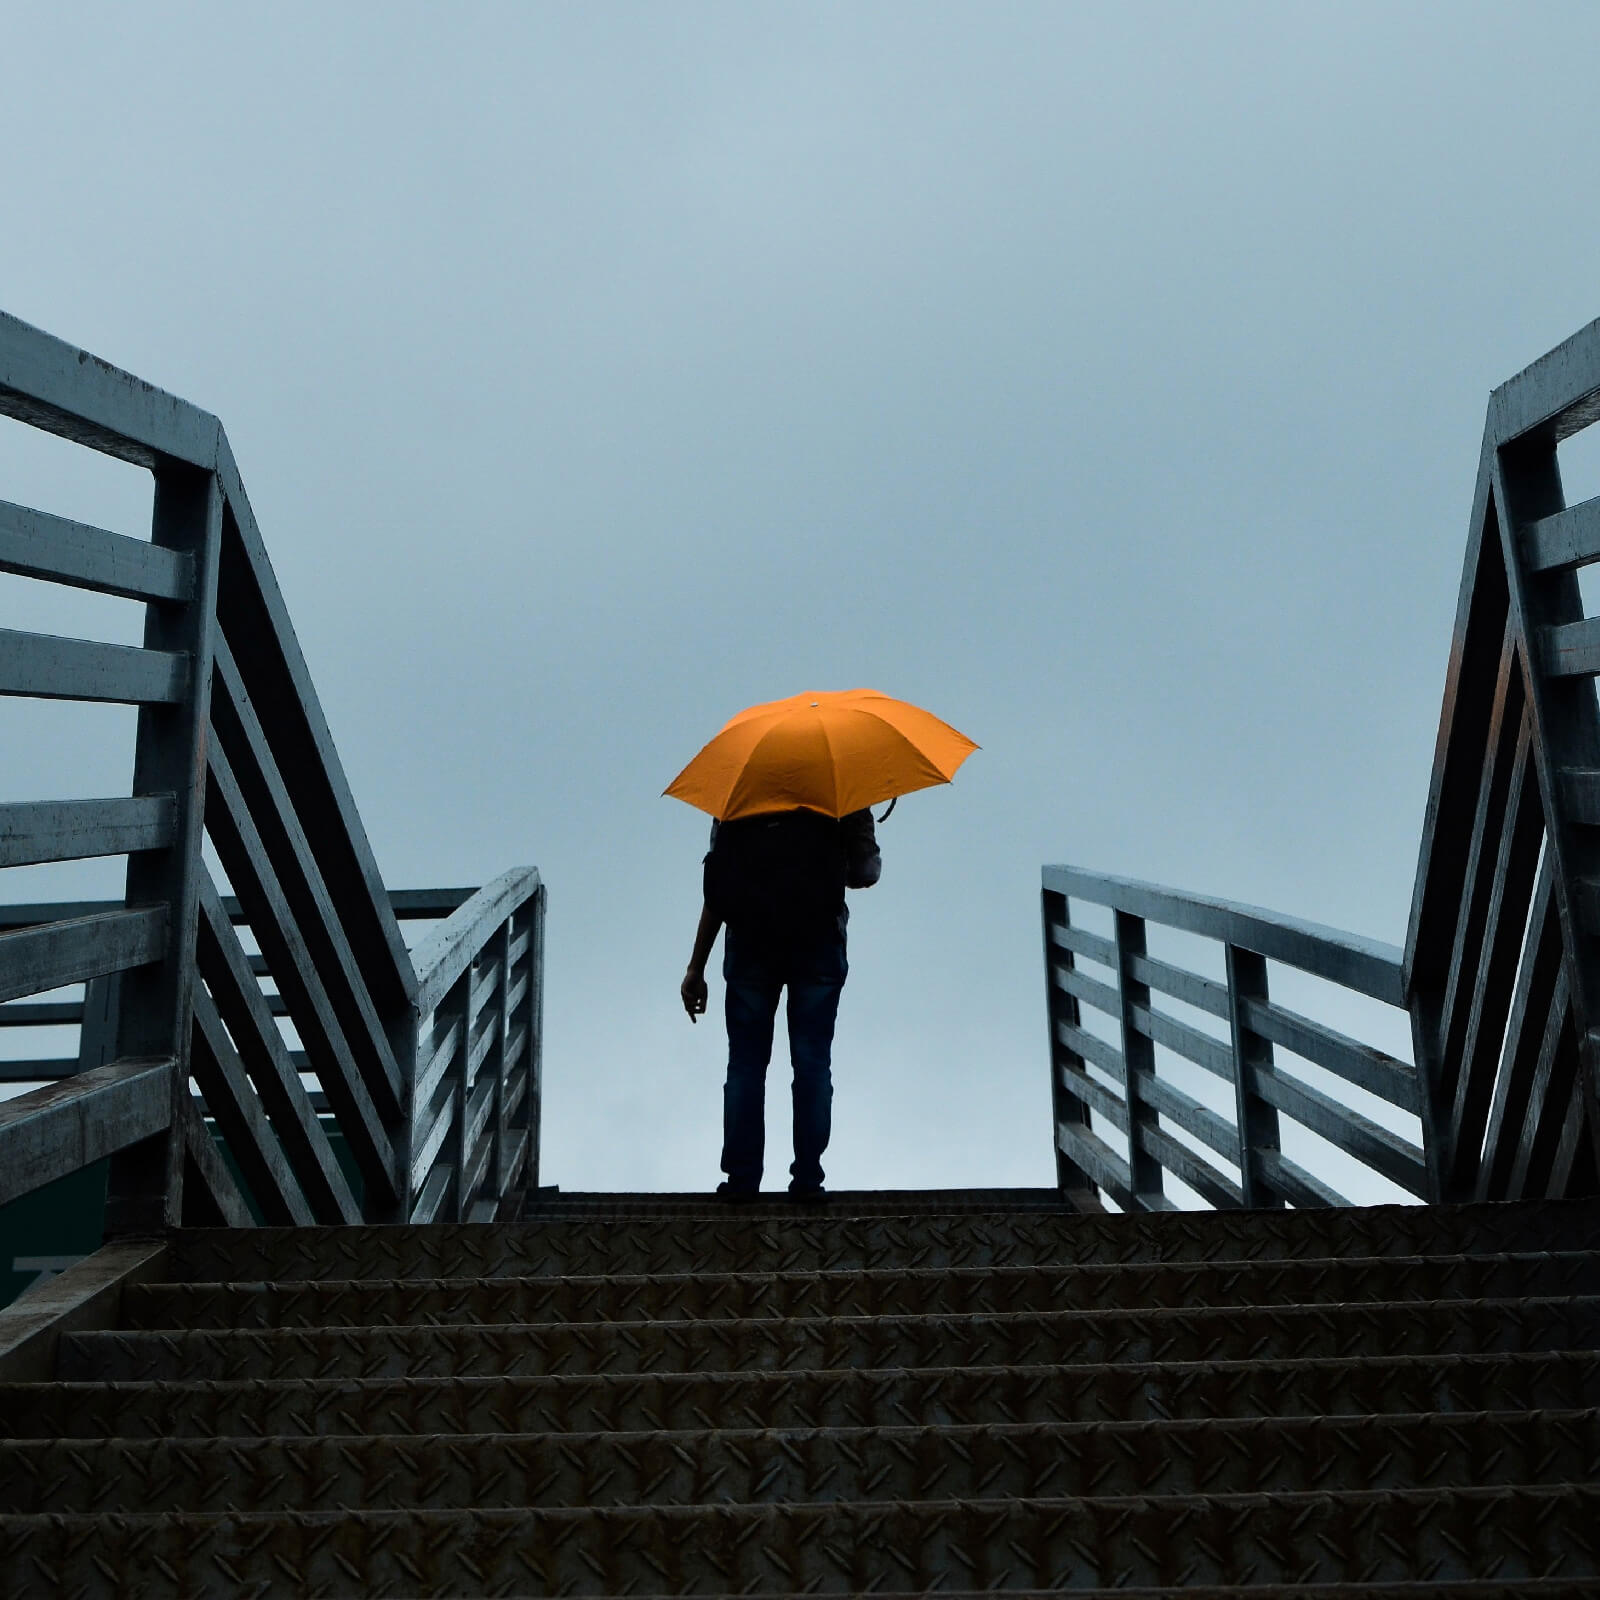 Silhouette of a person stood at the top of some outdoor steps holding an orange umbrella